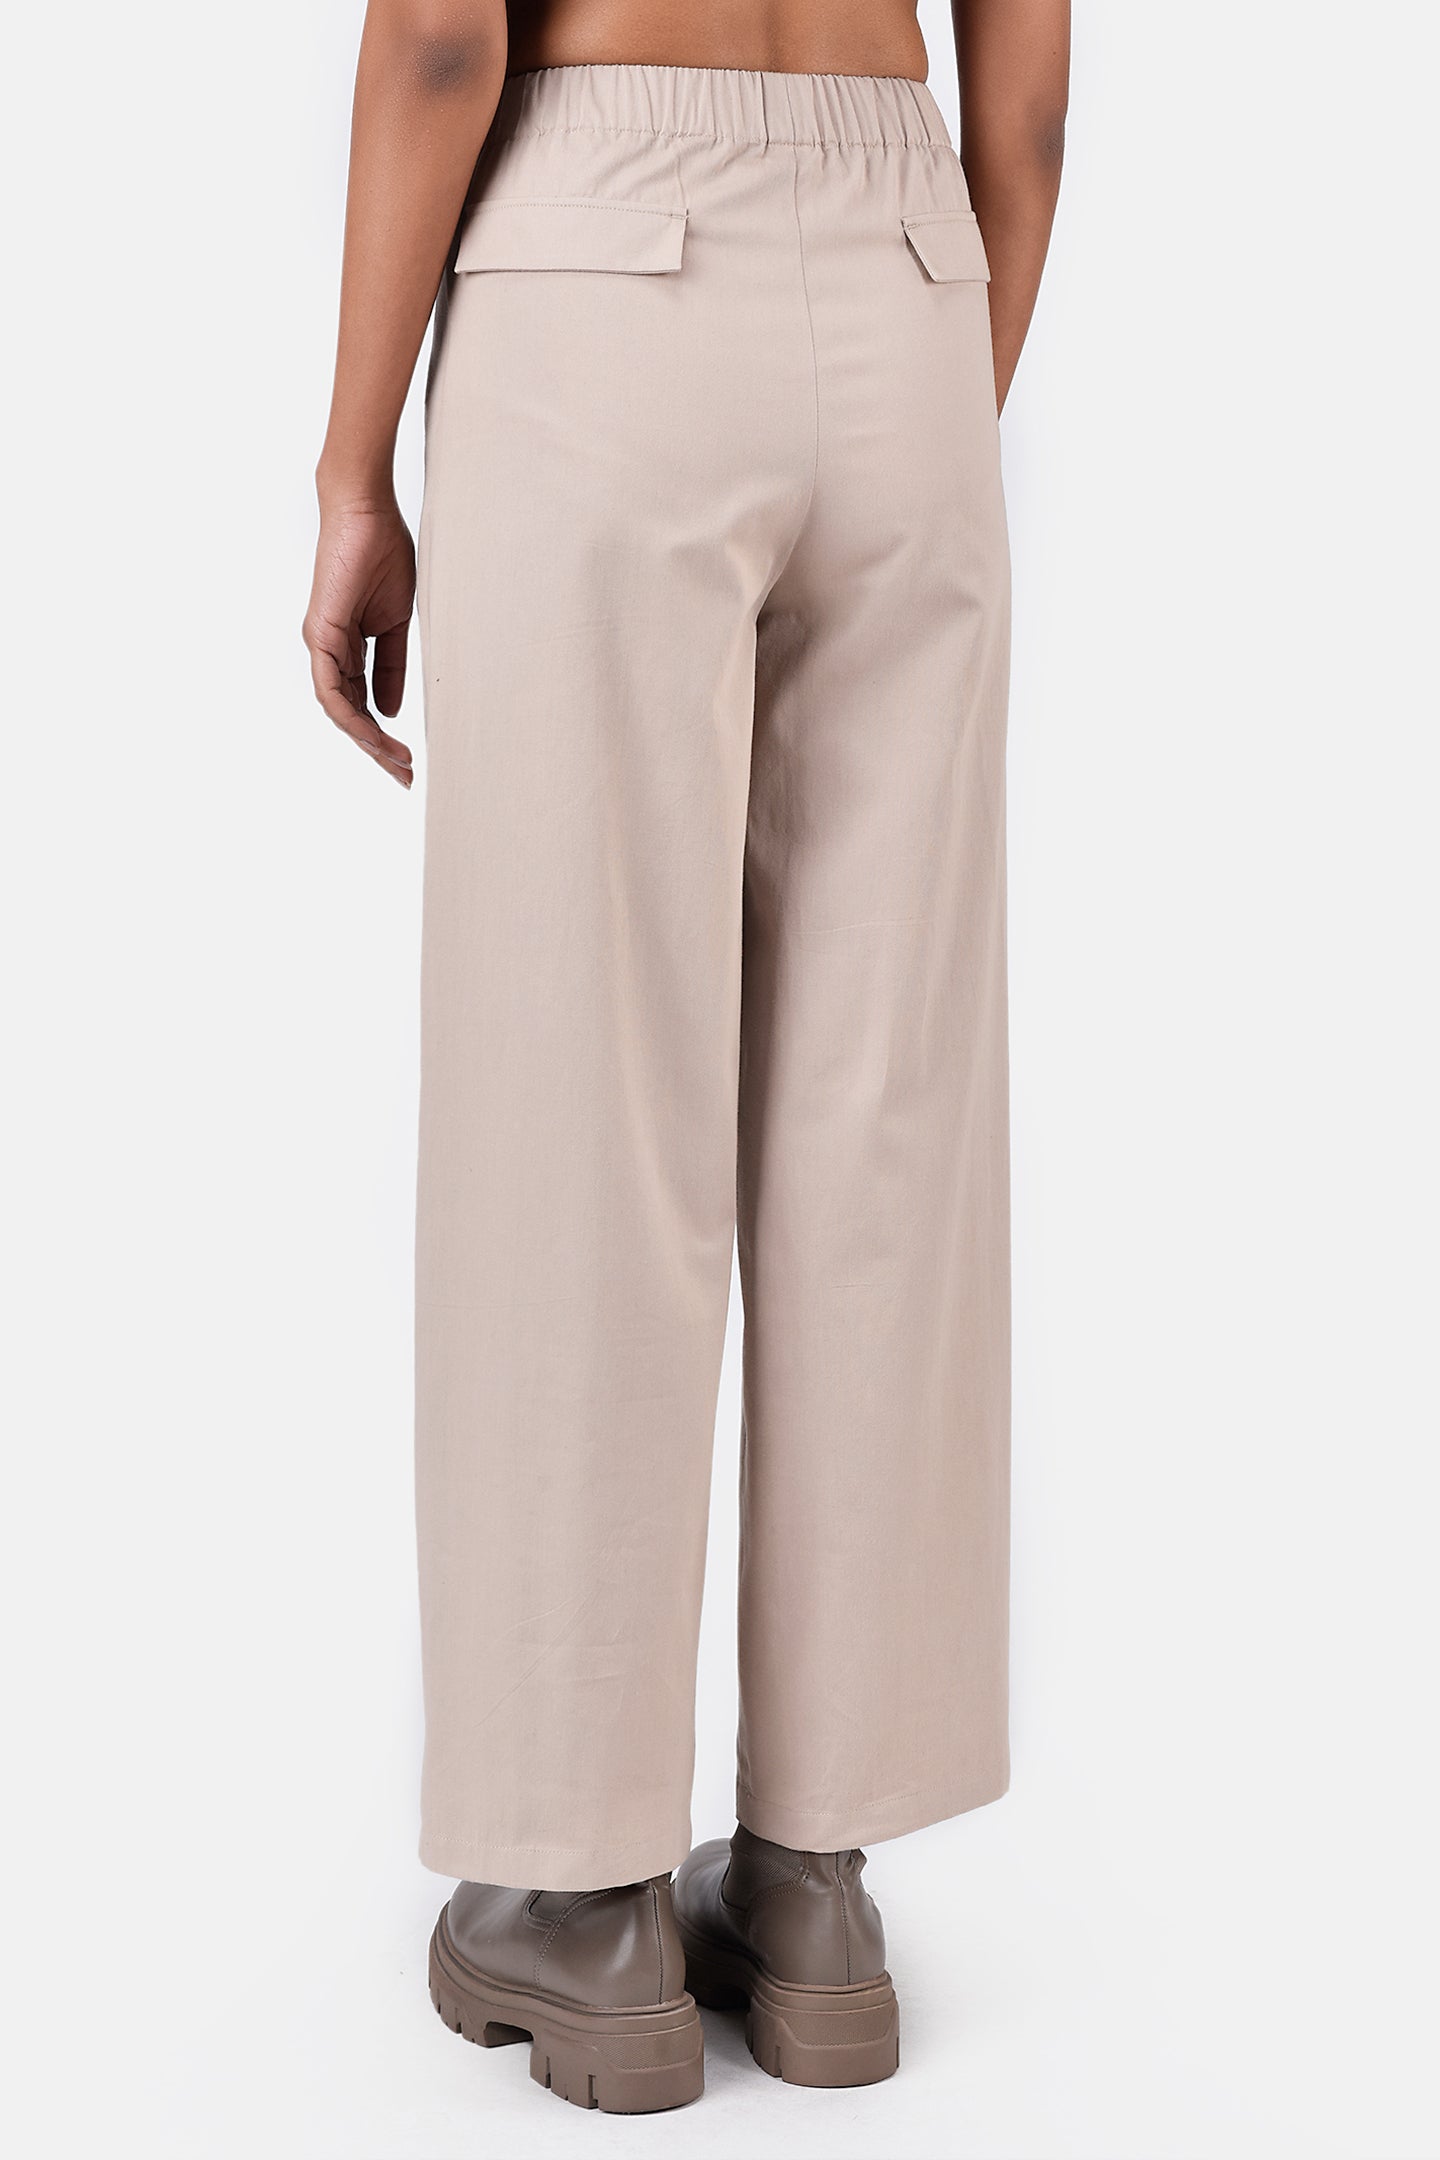 Cotton Light Twill Straight Fit Trousers with Knee Pleats